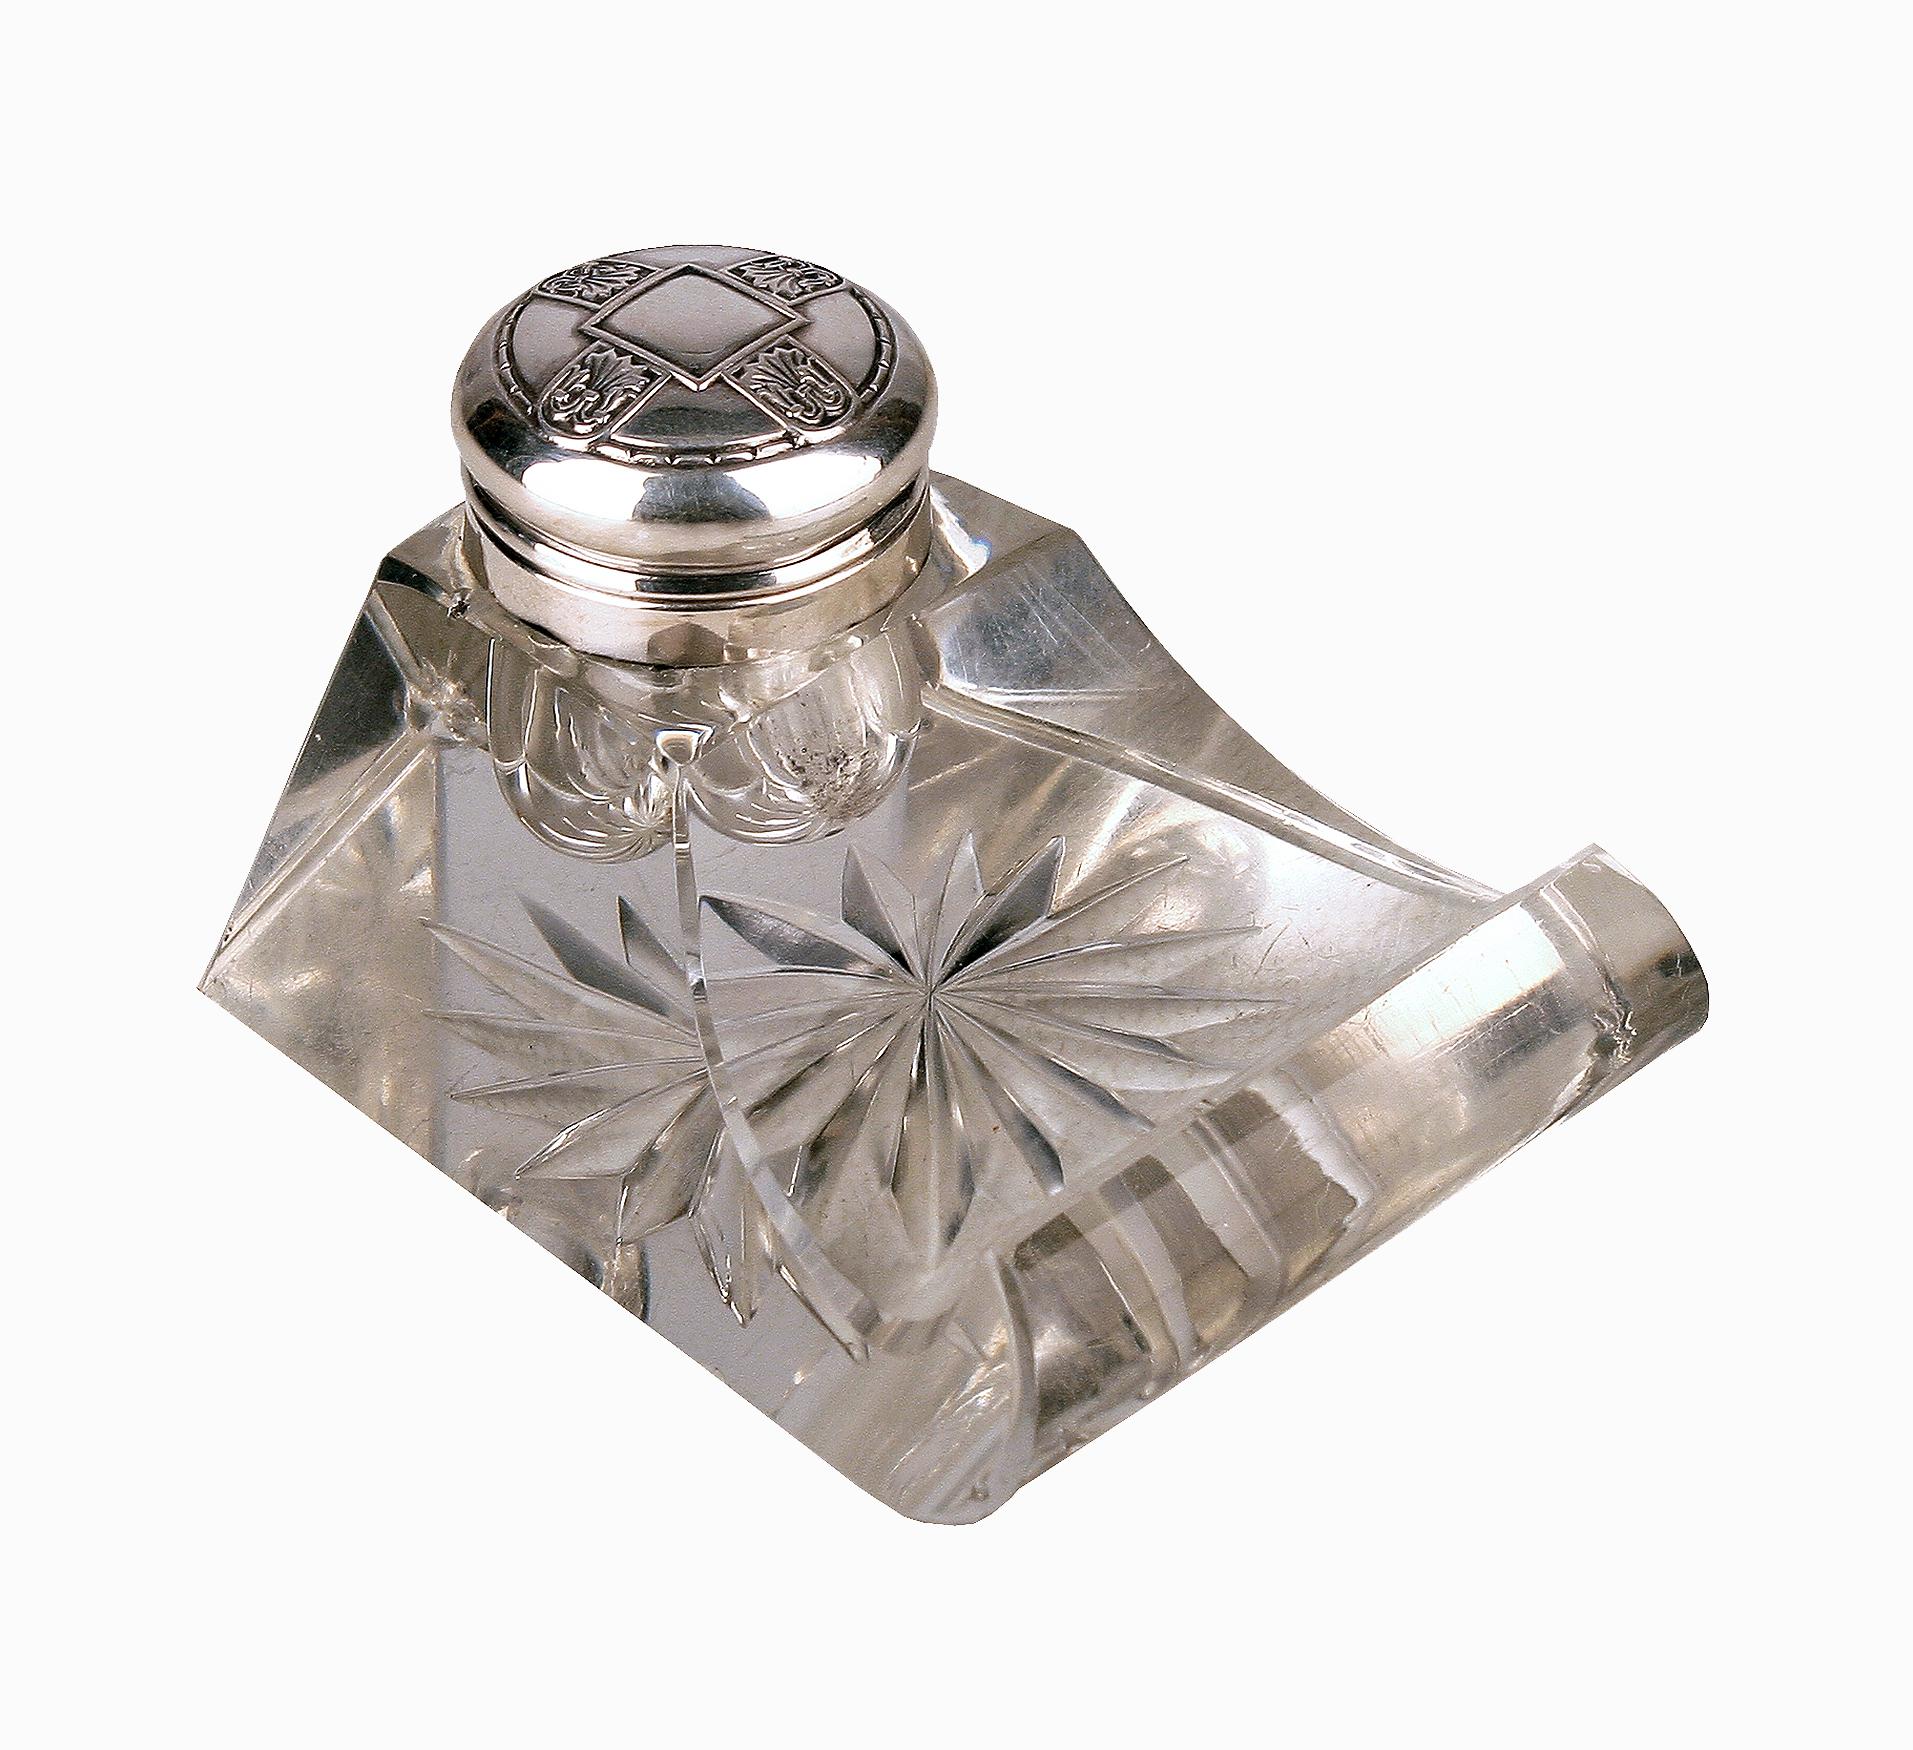 Late 19th century Jugendstil german cut glass crystal inkwell with polished 800 silver lid

By: unknown
Material: glass, cut glass, crystal, silver, silver plate, metal
Technique: cast, molded, metalwork, plated, silvered, polished,